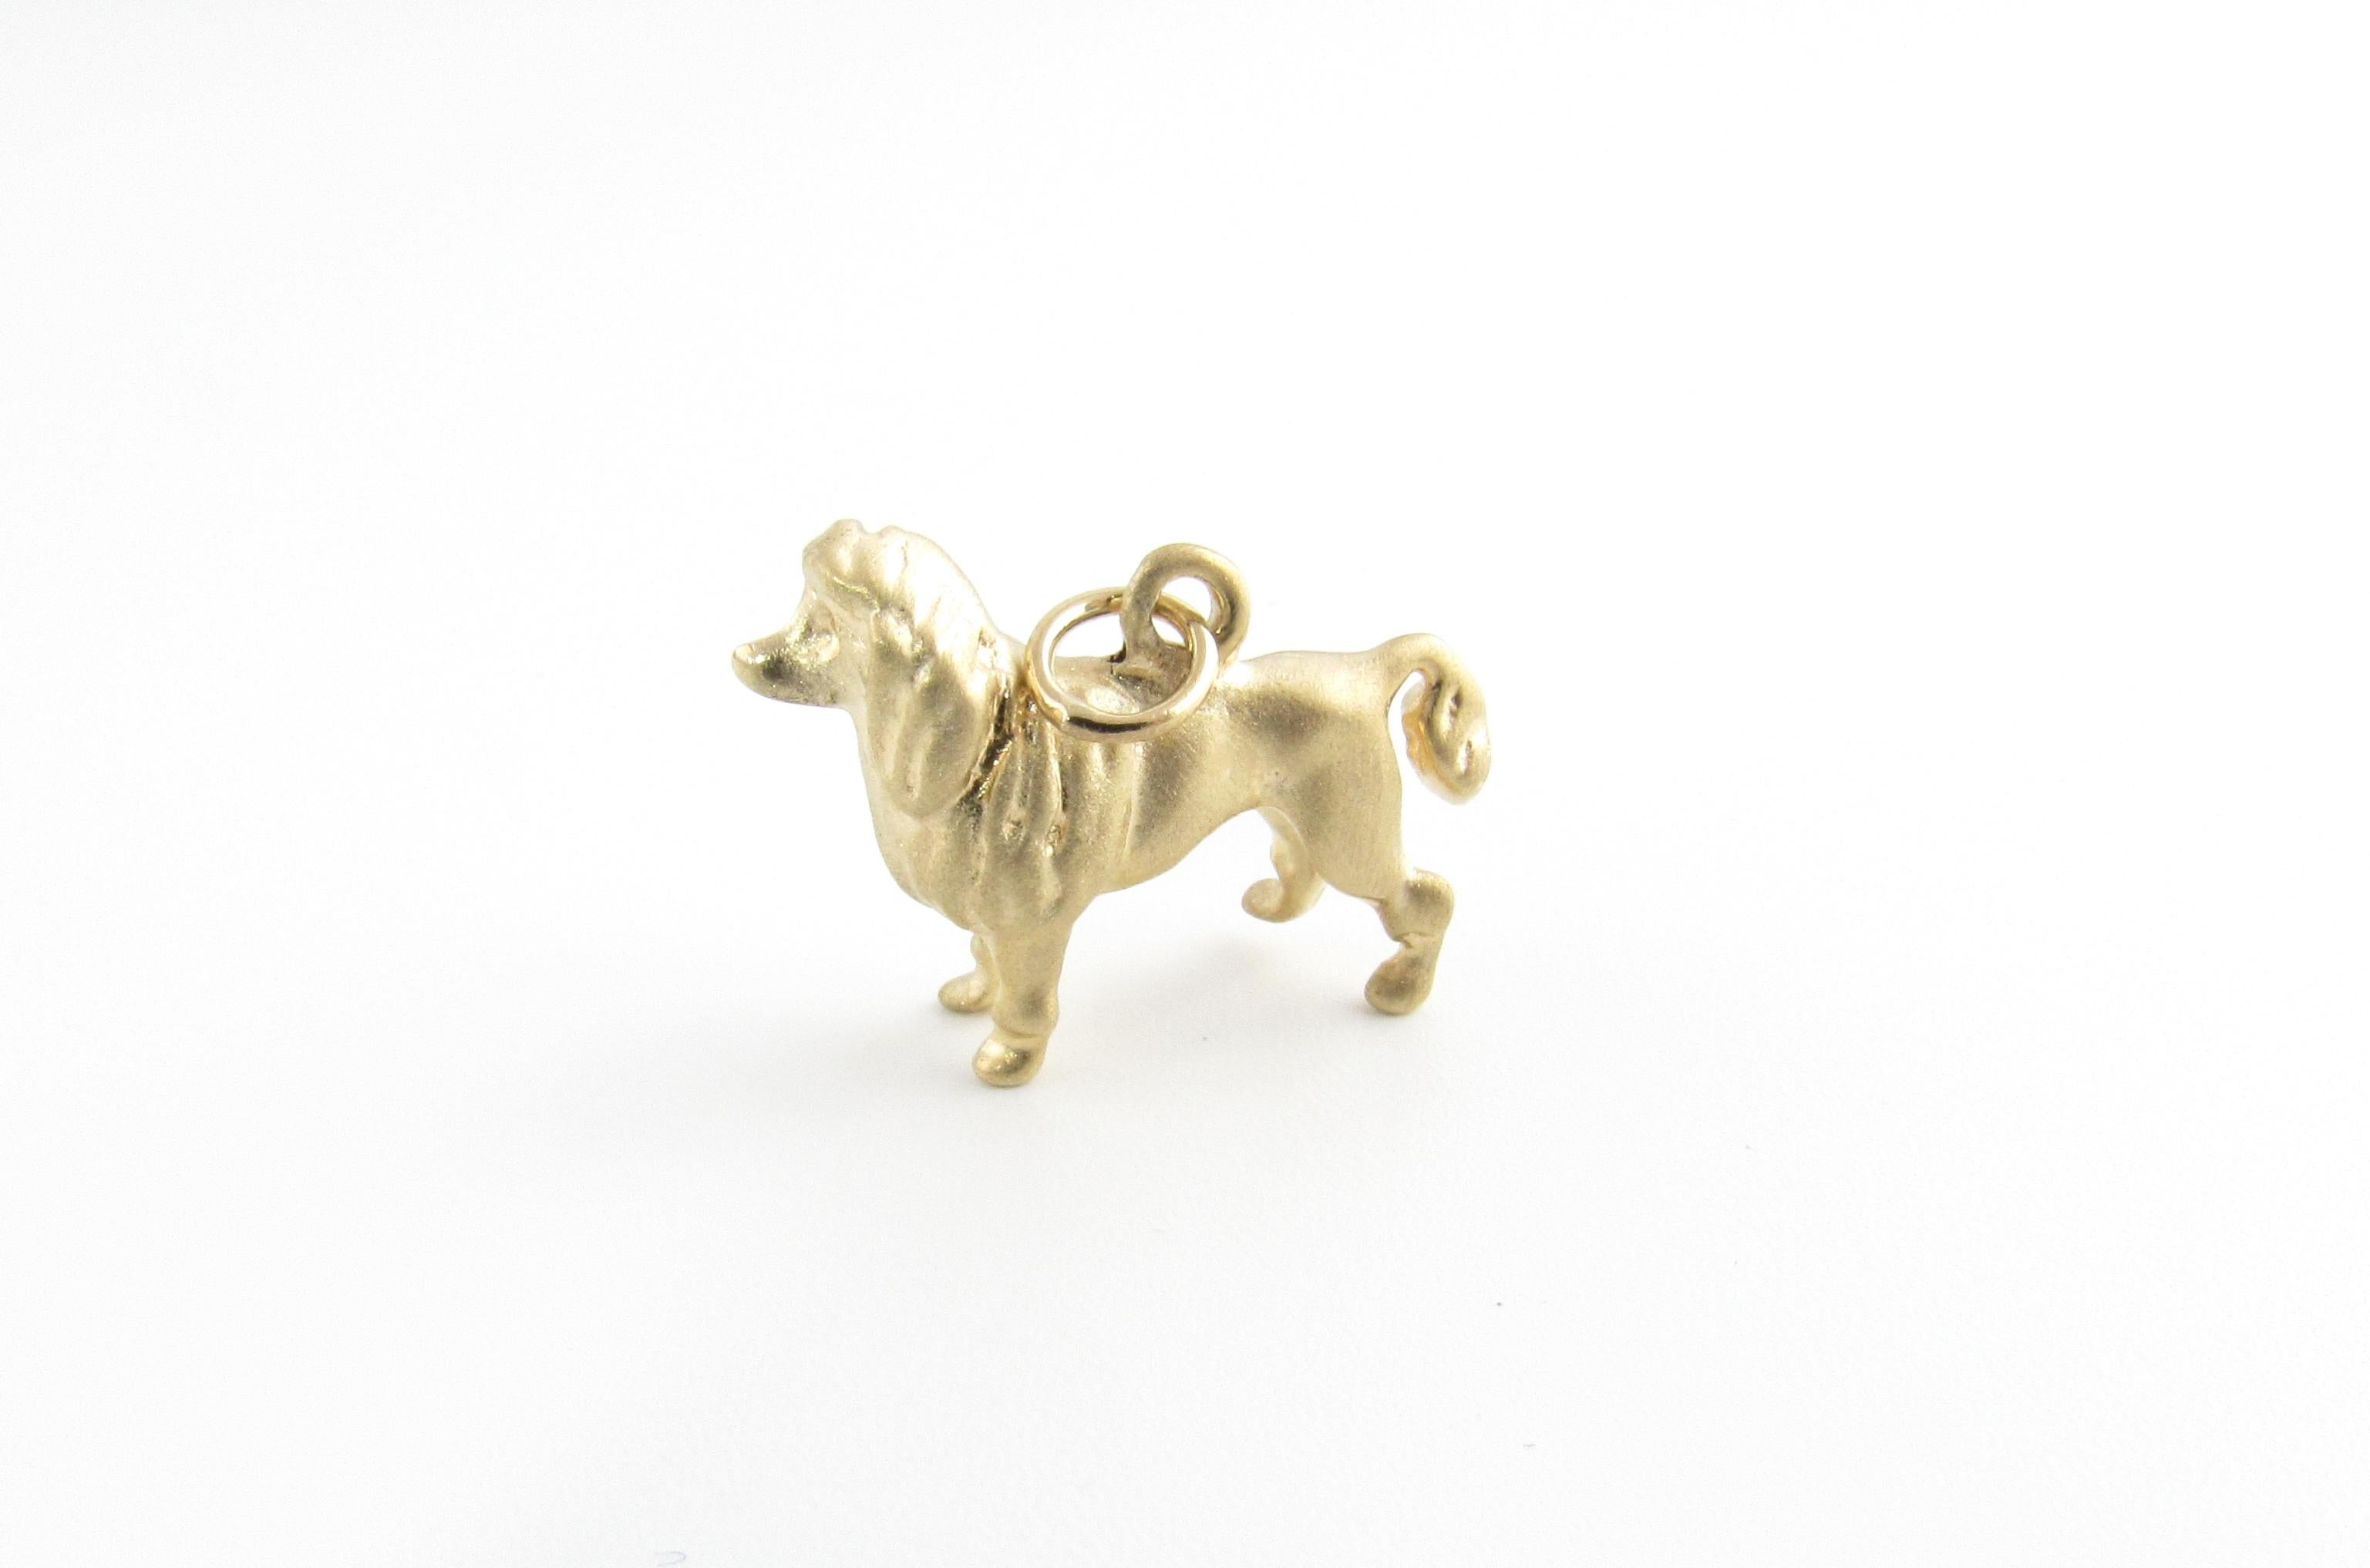 Vintage 14 Karat Yellow Gold Poodle Charm

The intelligent and loyal poodle is one of the most popular dog breeds in the United States.

This lovely 3D charm features the beloved poodle meticulously detailed in 14K yellow gold.

Size: 14 mm x 18 mm